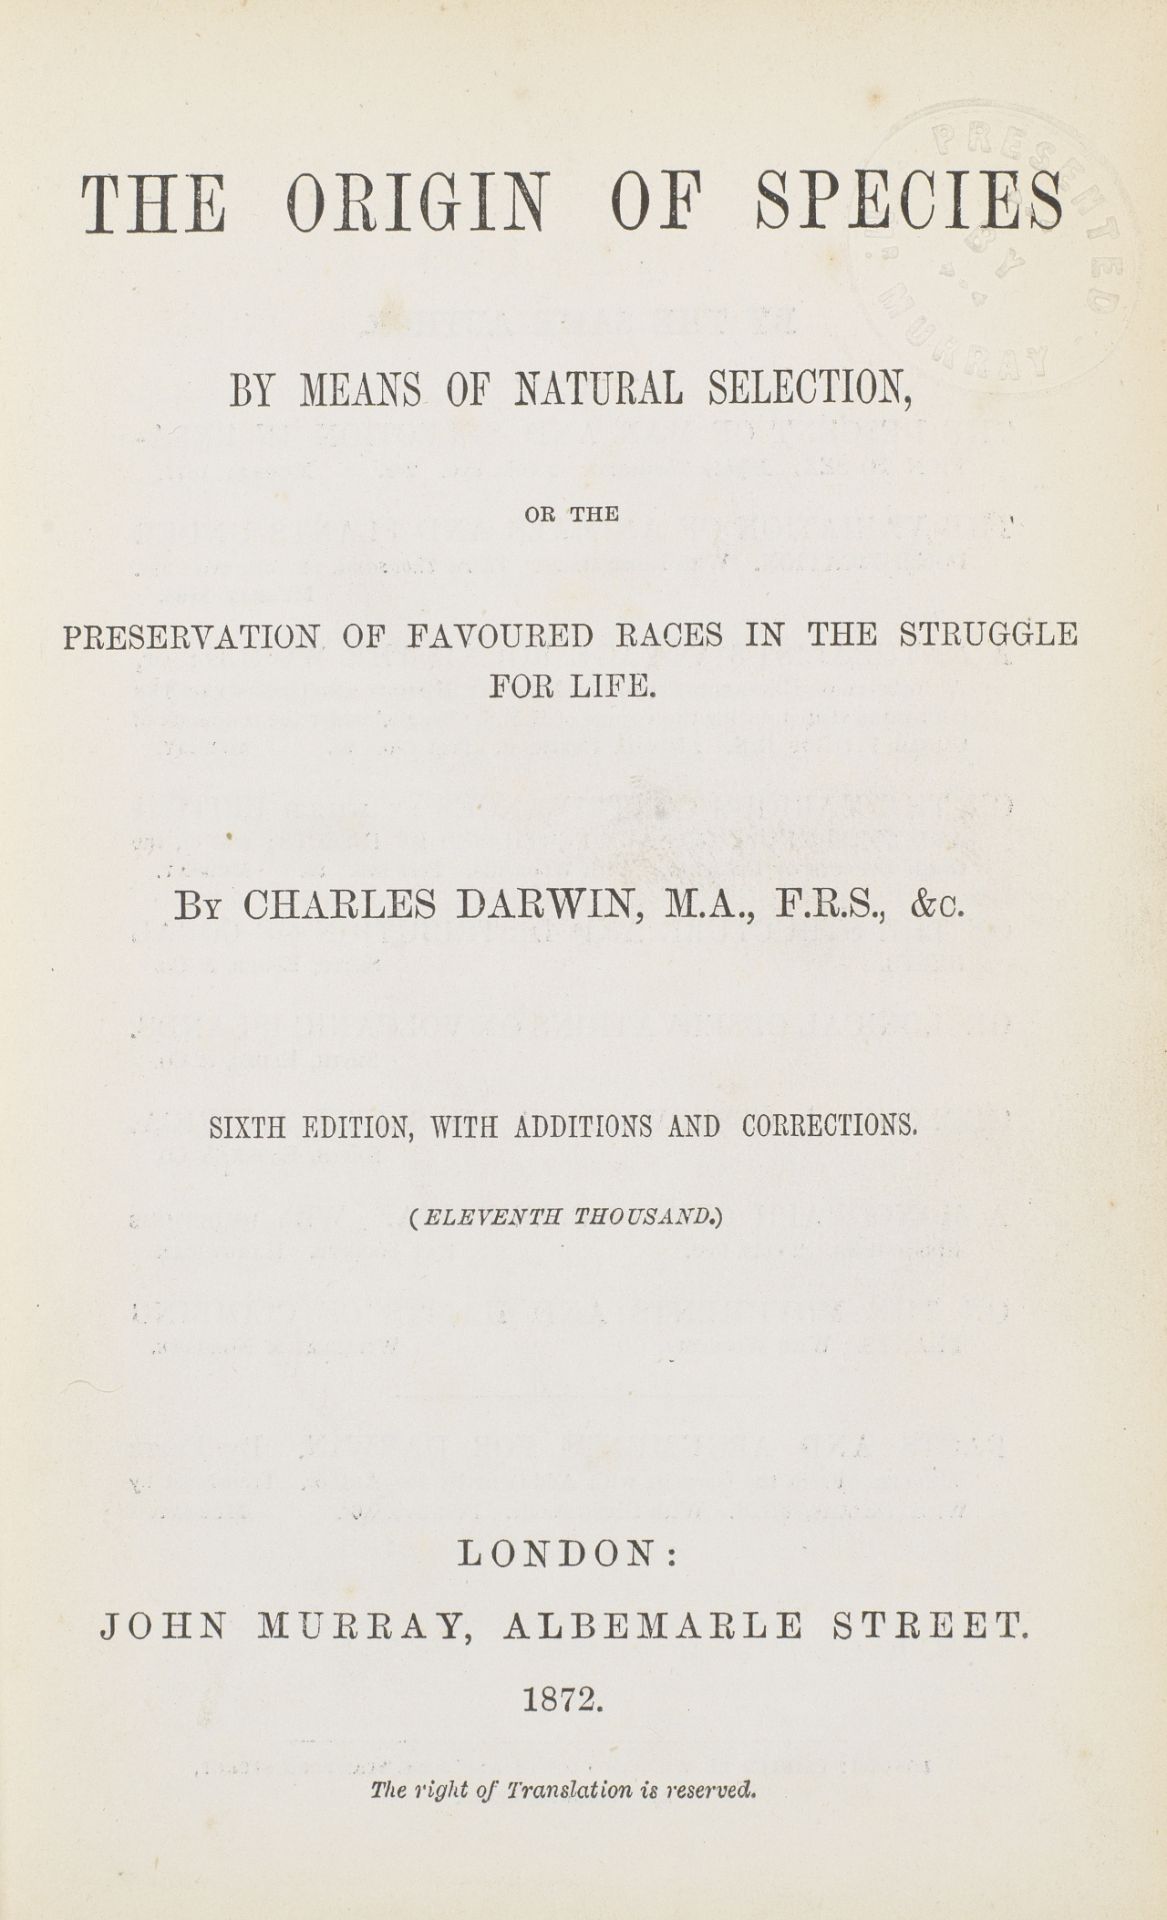 DARWIN (CHARLES) On the Origin of Species by Means of Natural Selection...Sixth Edition with Ad...